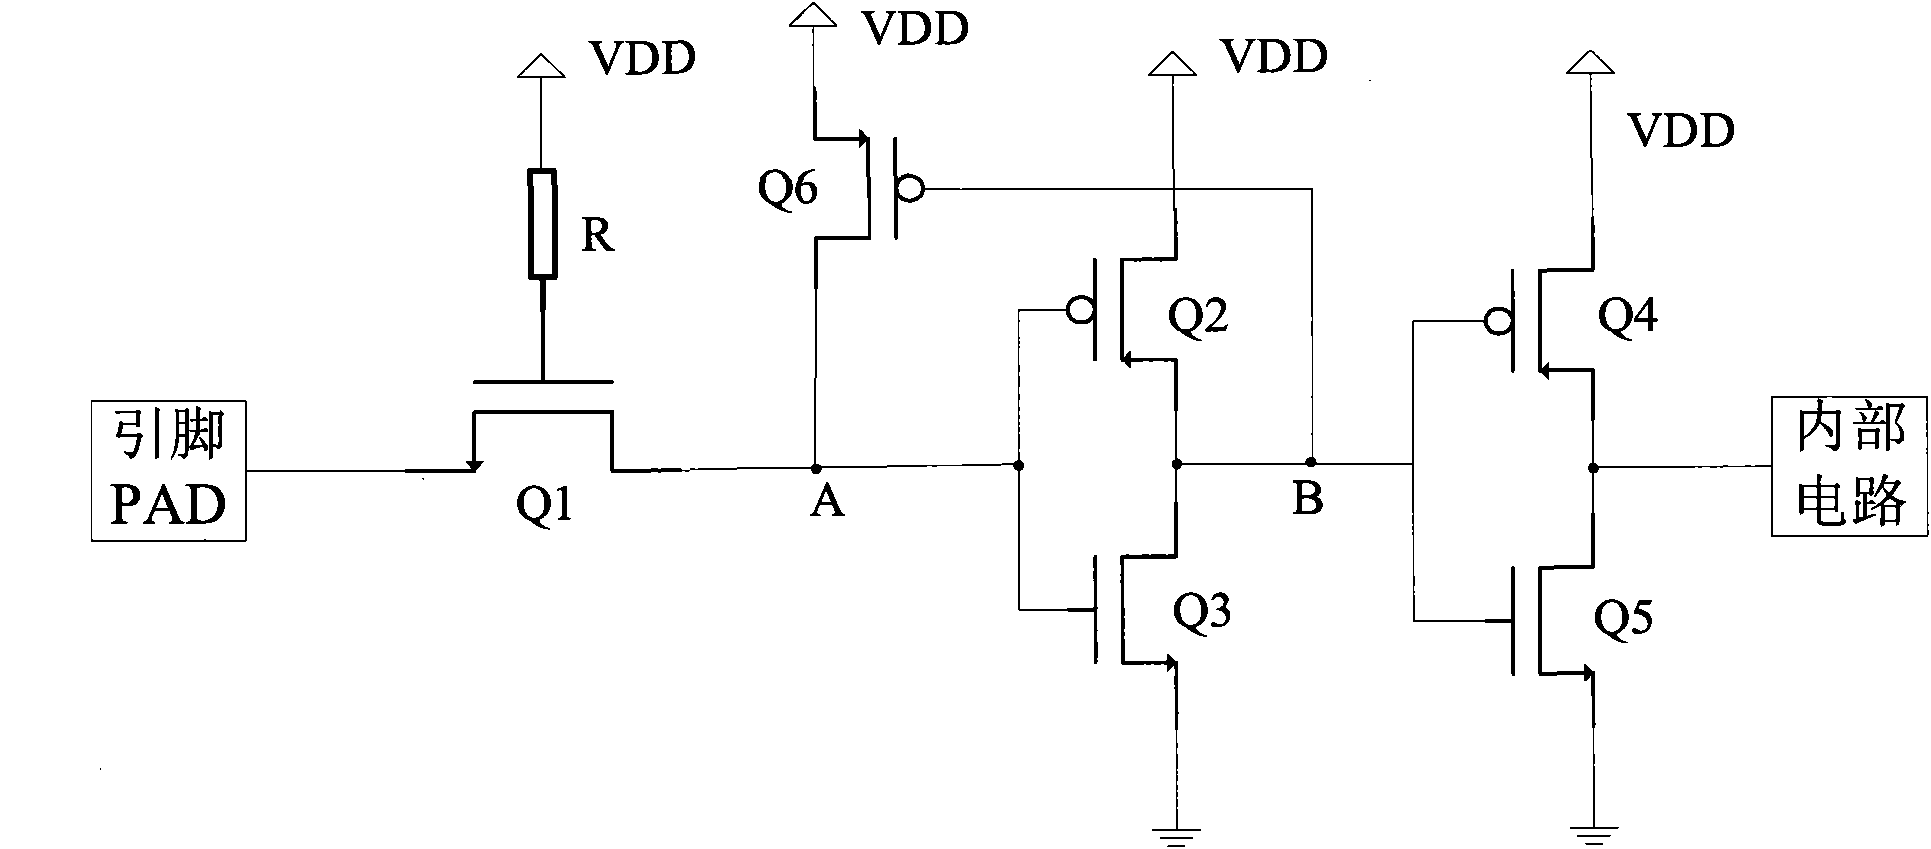 Complementary metal oxide semiconductor (CMOS) input/output interface circuit